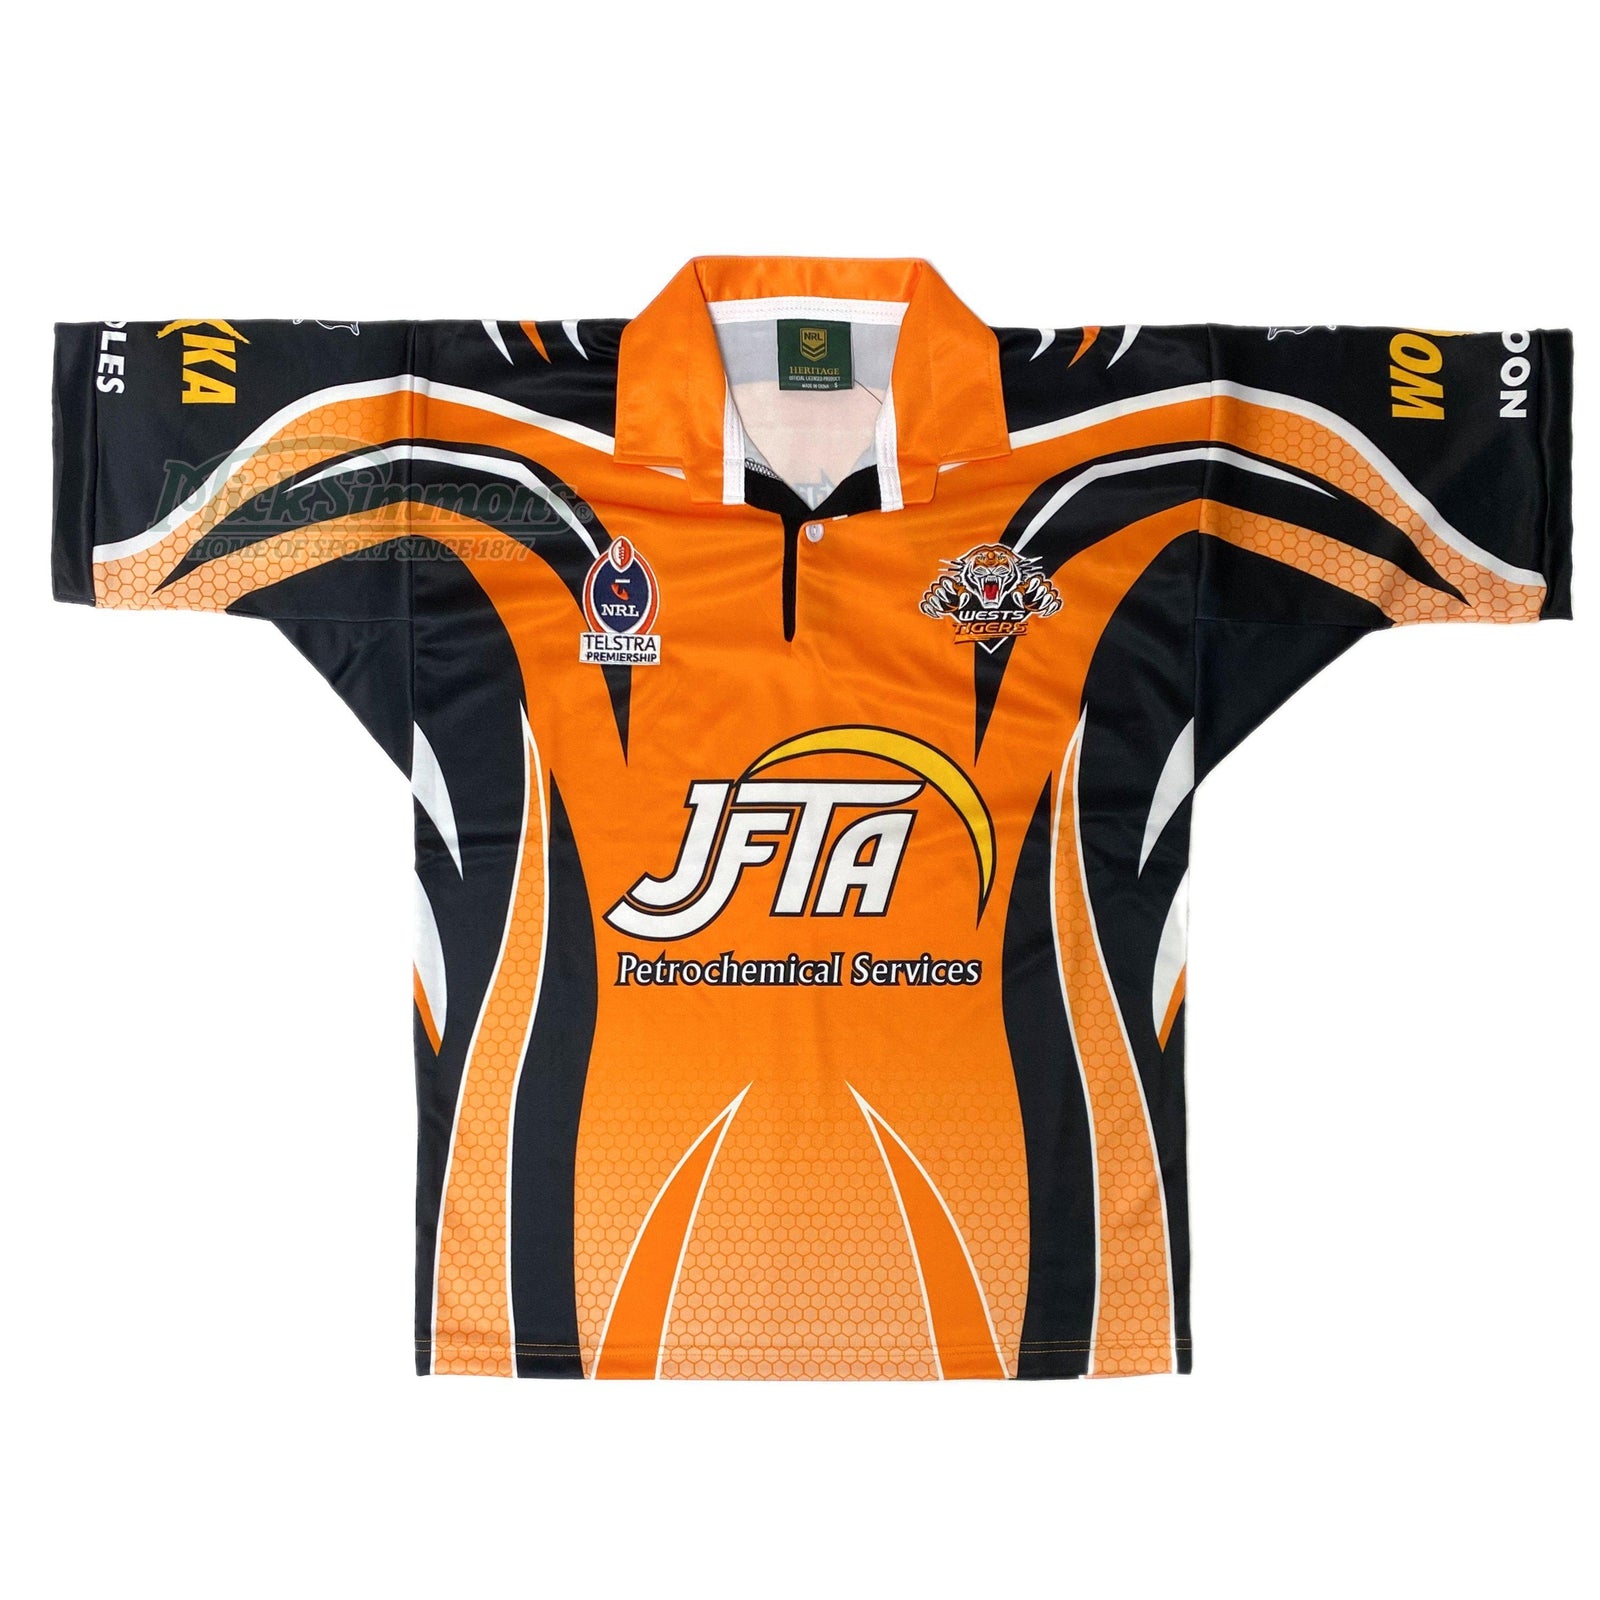 NEW Wests Tigers 2005 NRL Vintage Retro Heritage Rugby League Jersey  Guernsey